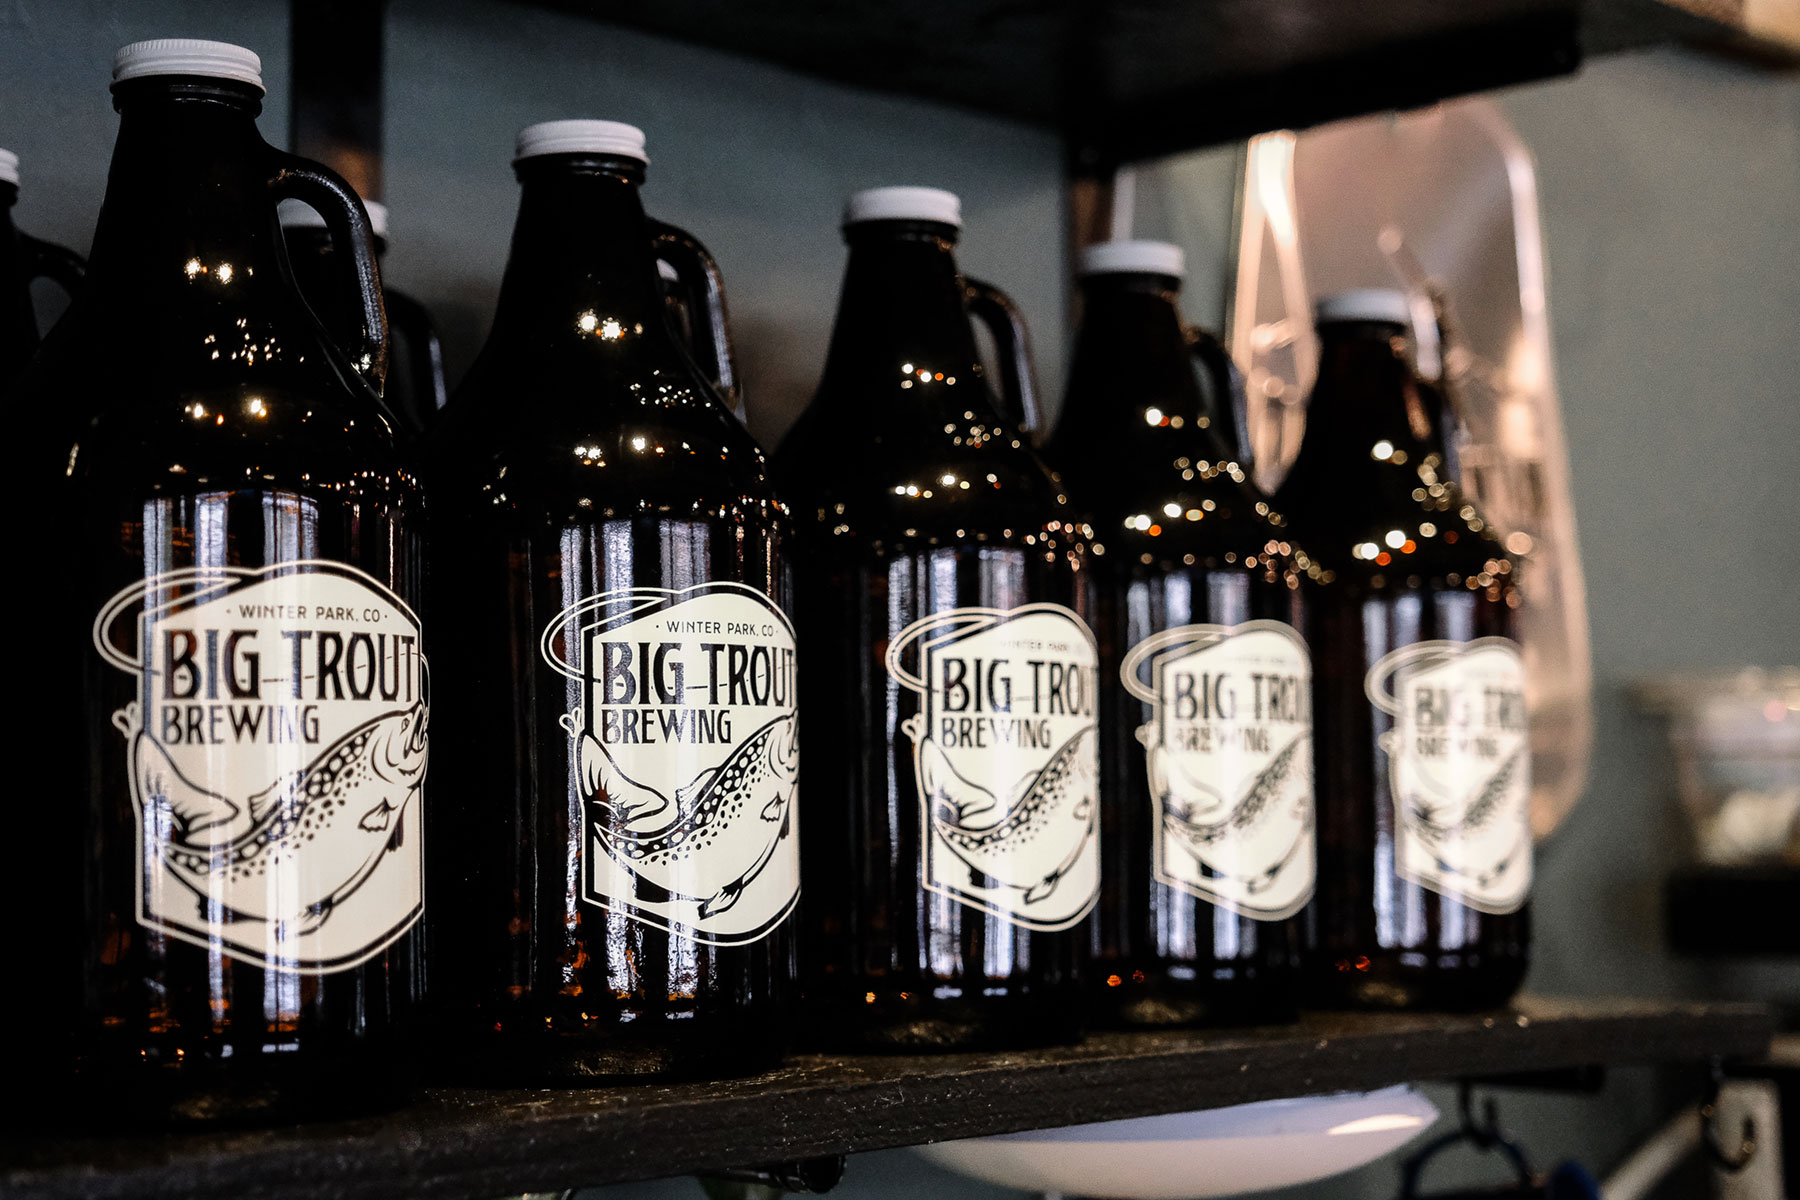 Growlers at Big Trout Brewing in Winter Park Co